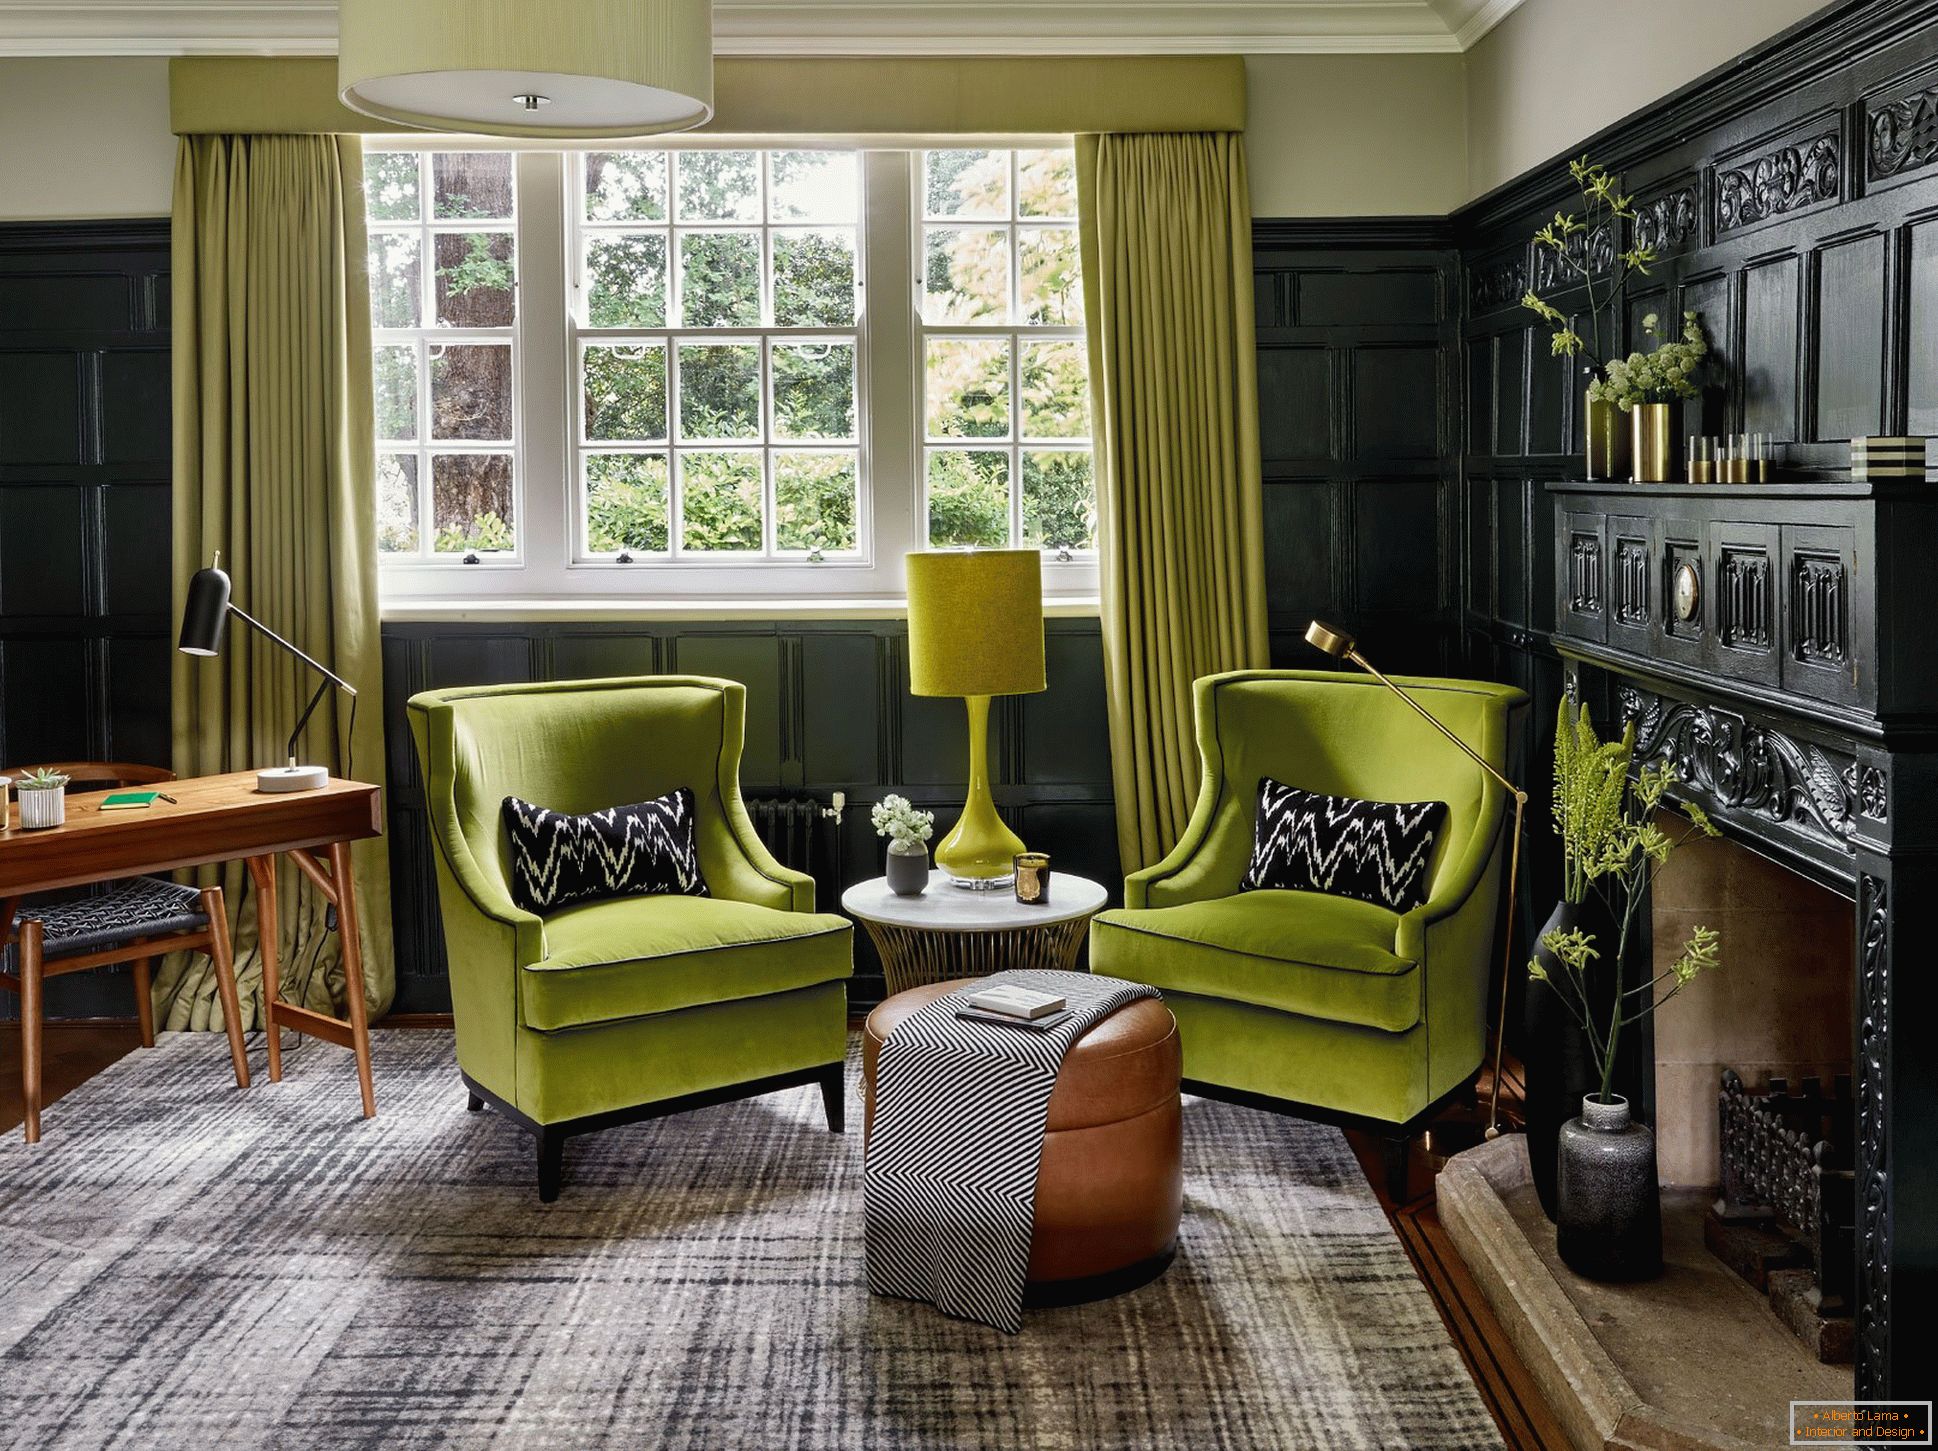 Green upholstered furniture in the living room